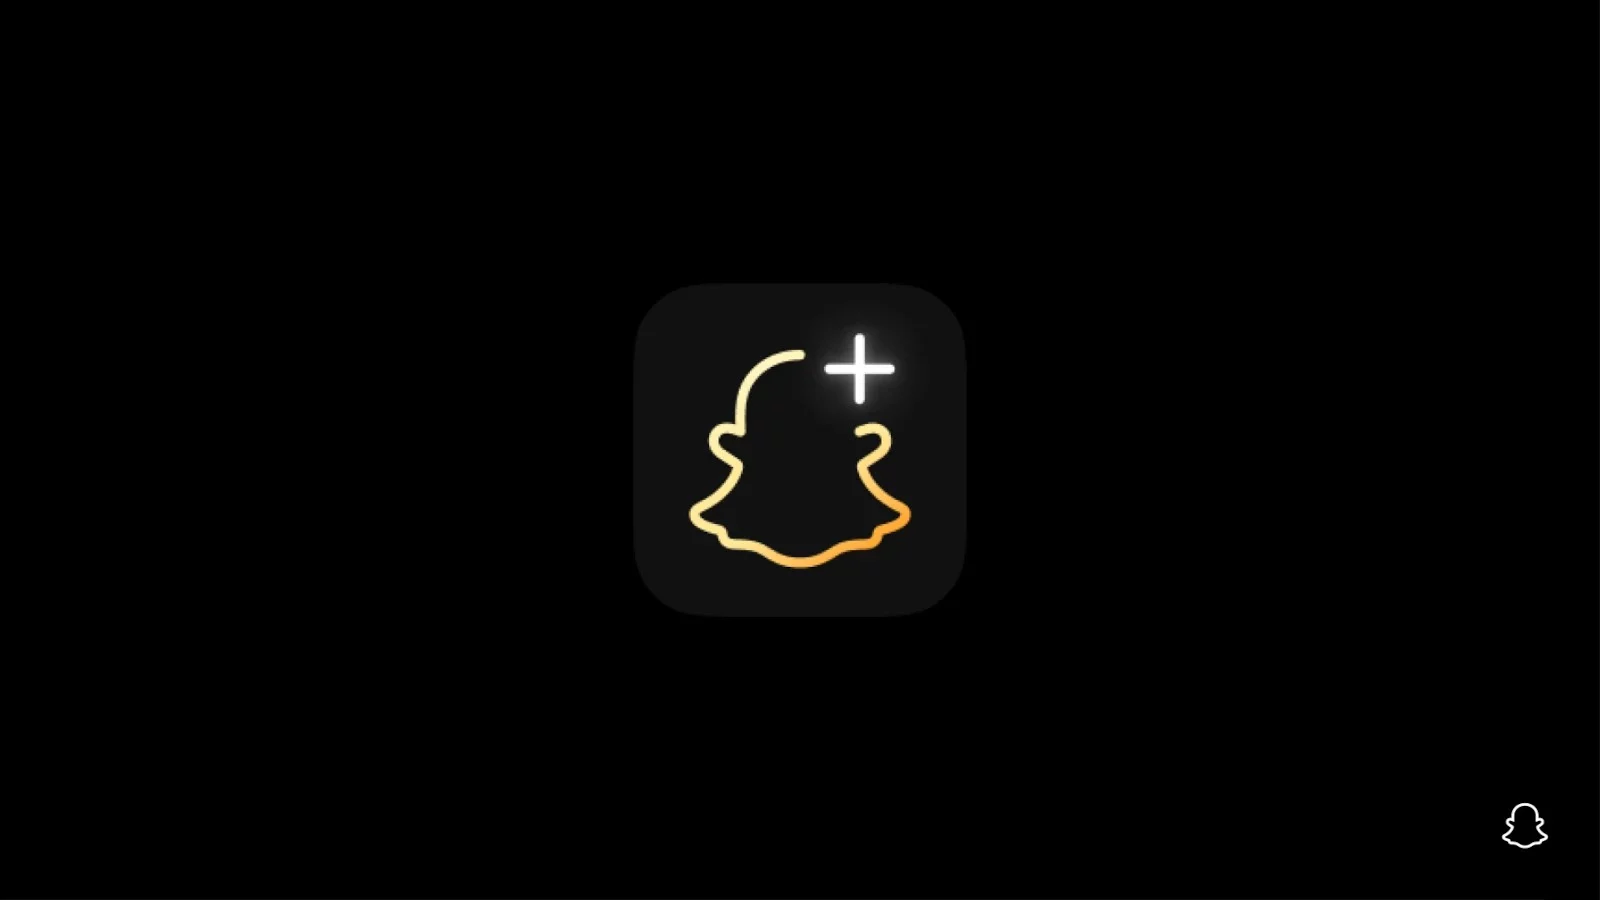 Snapchat officially launched a p